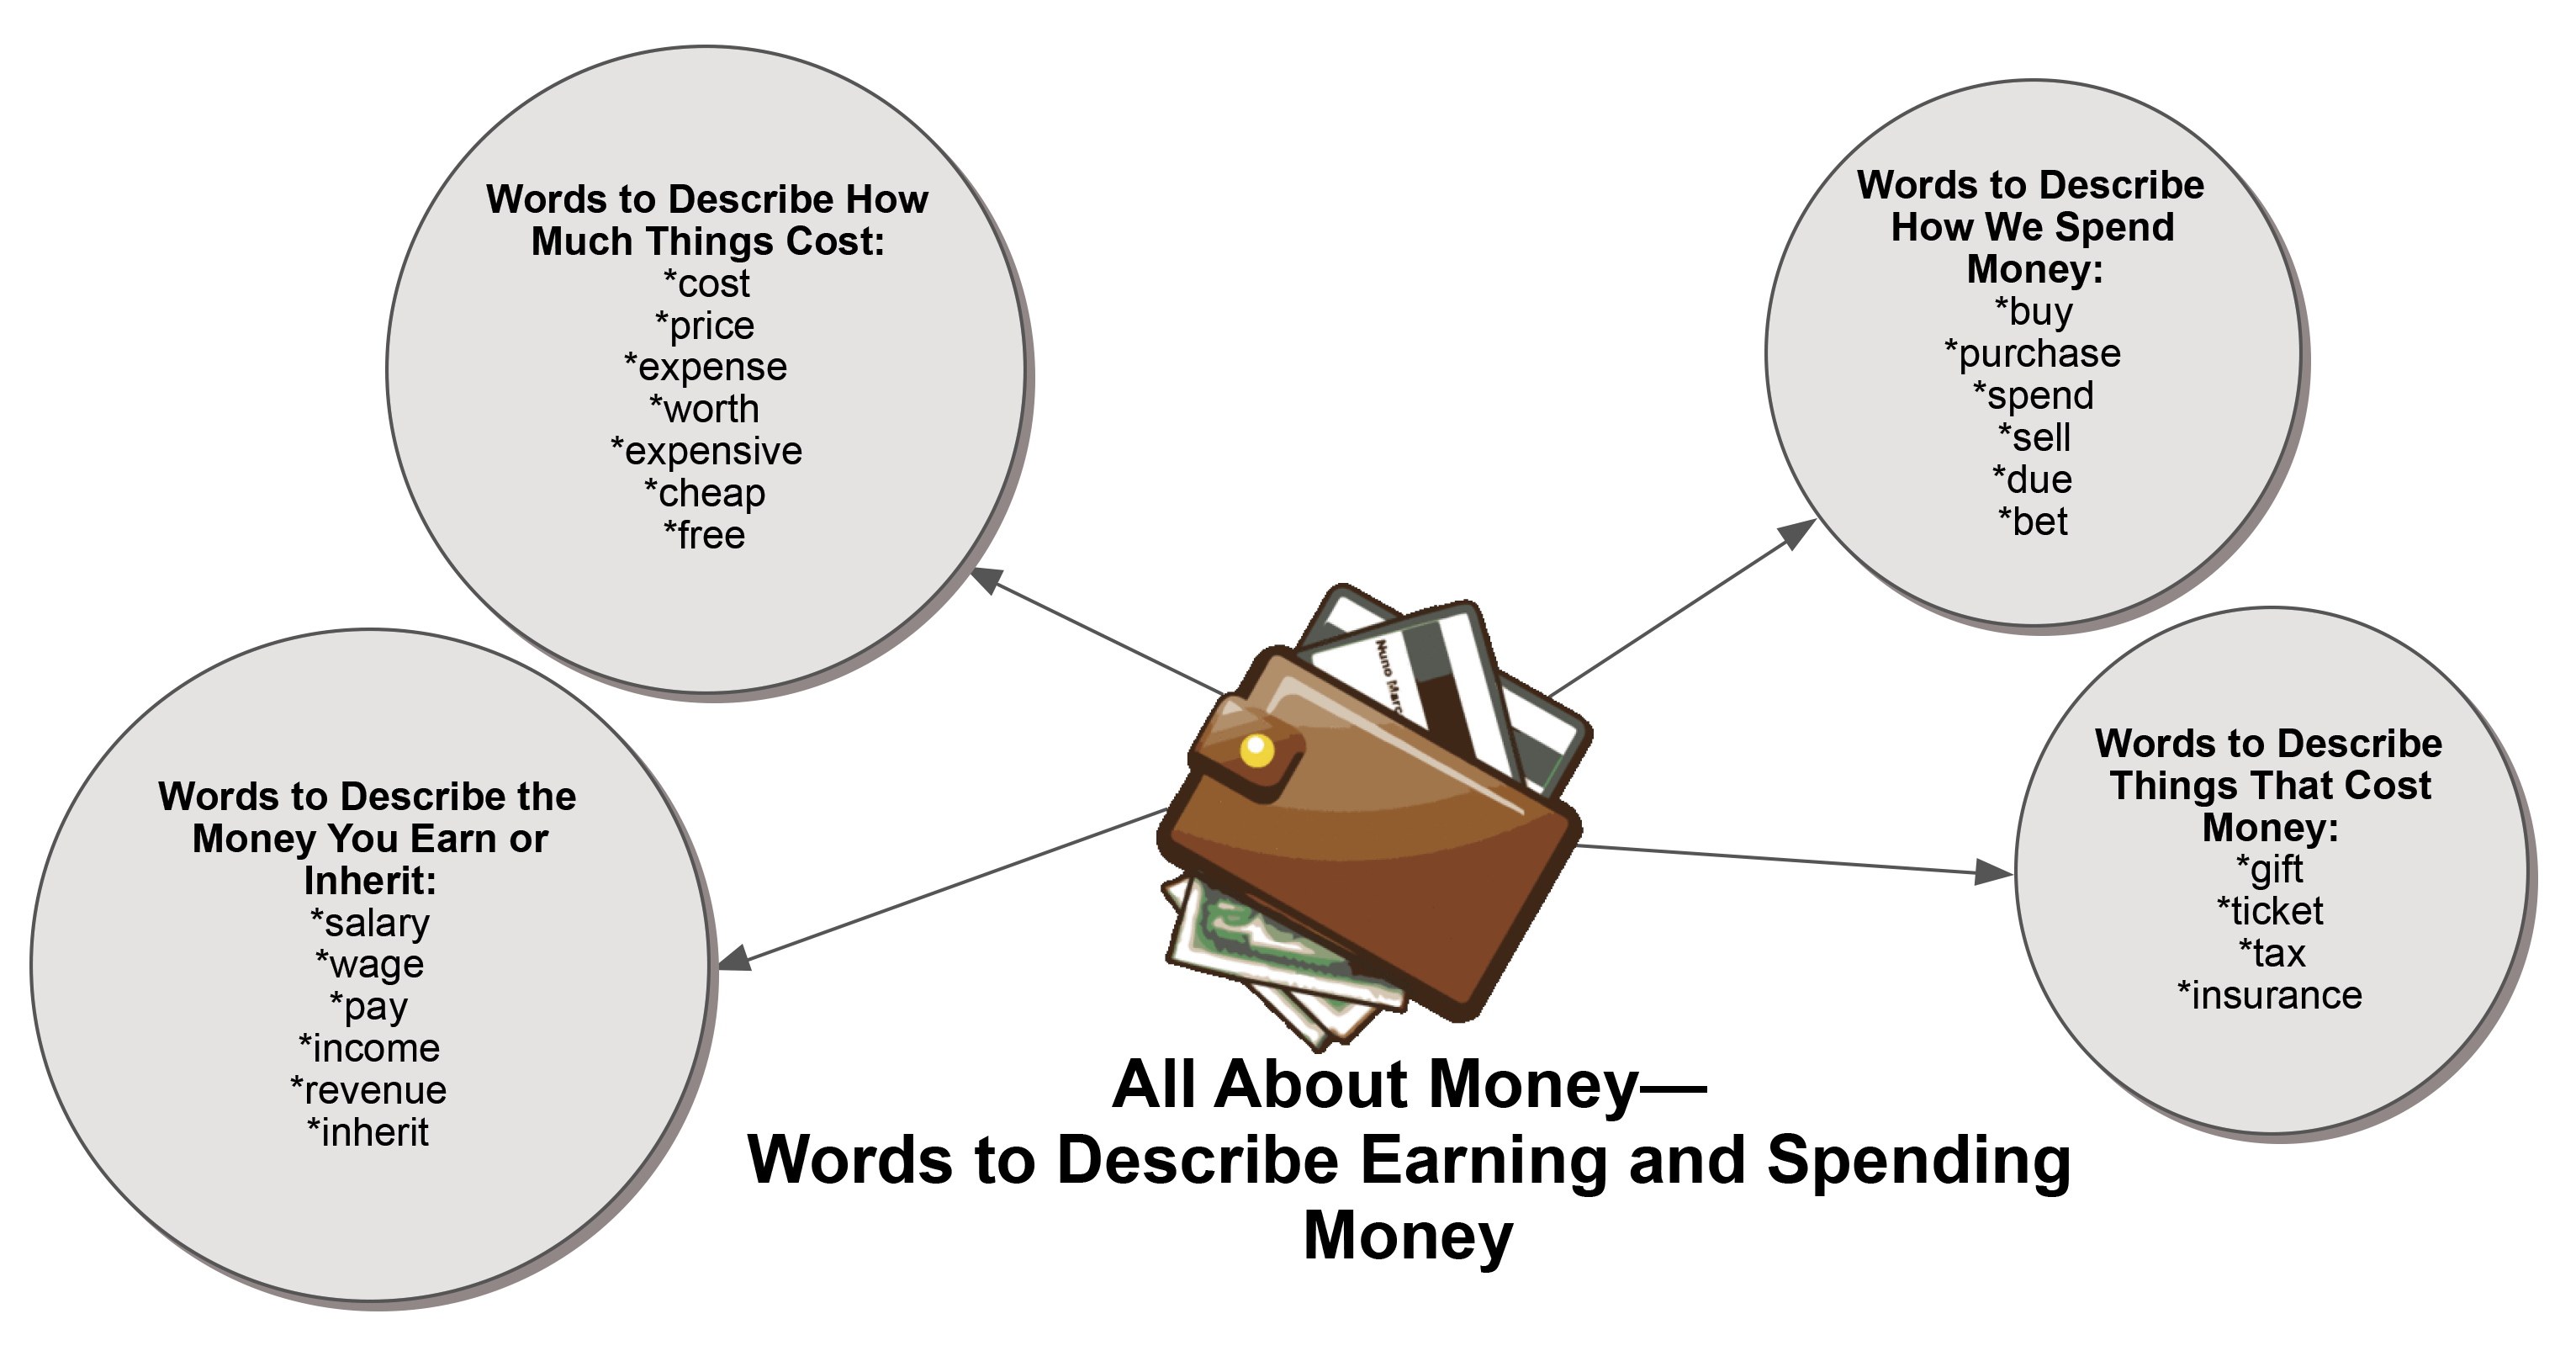 MONEY-Words-to-Describe-Earning-and-Spending-Money.png